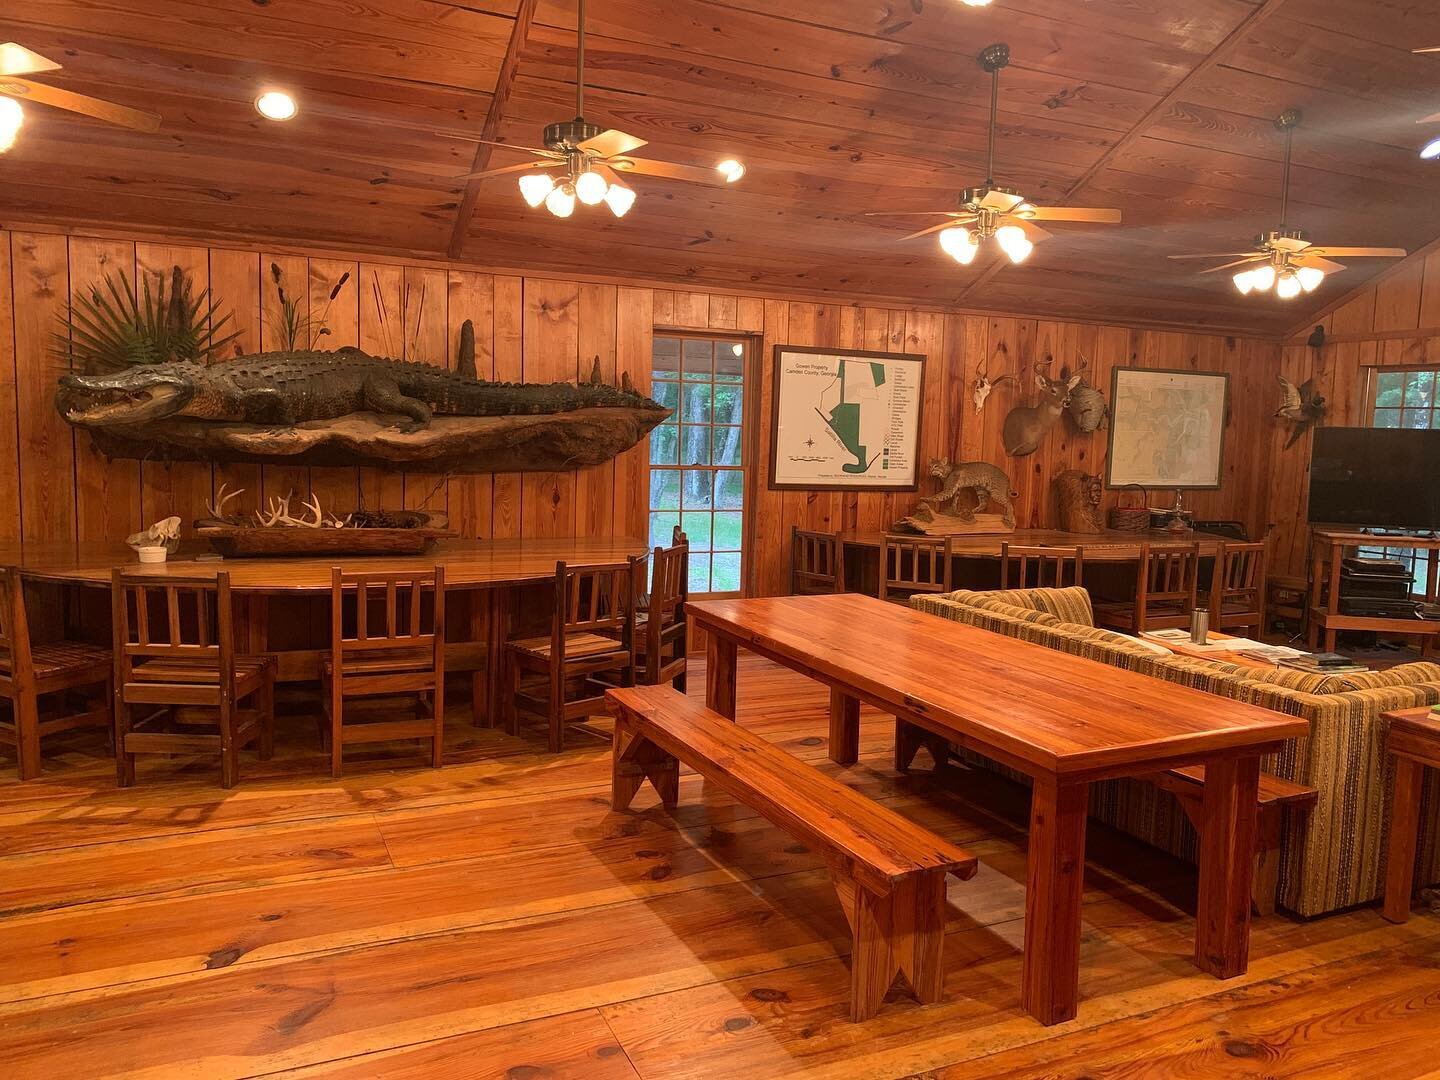 Alligator mount AND 100+ year old pickle barrel turned into two tables. Even the chairs were made from the pickle barrel wood!